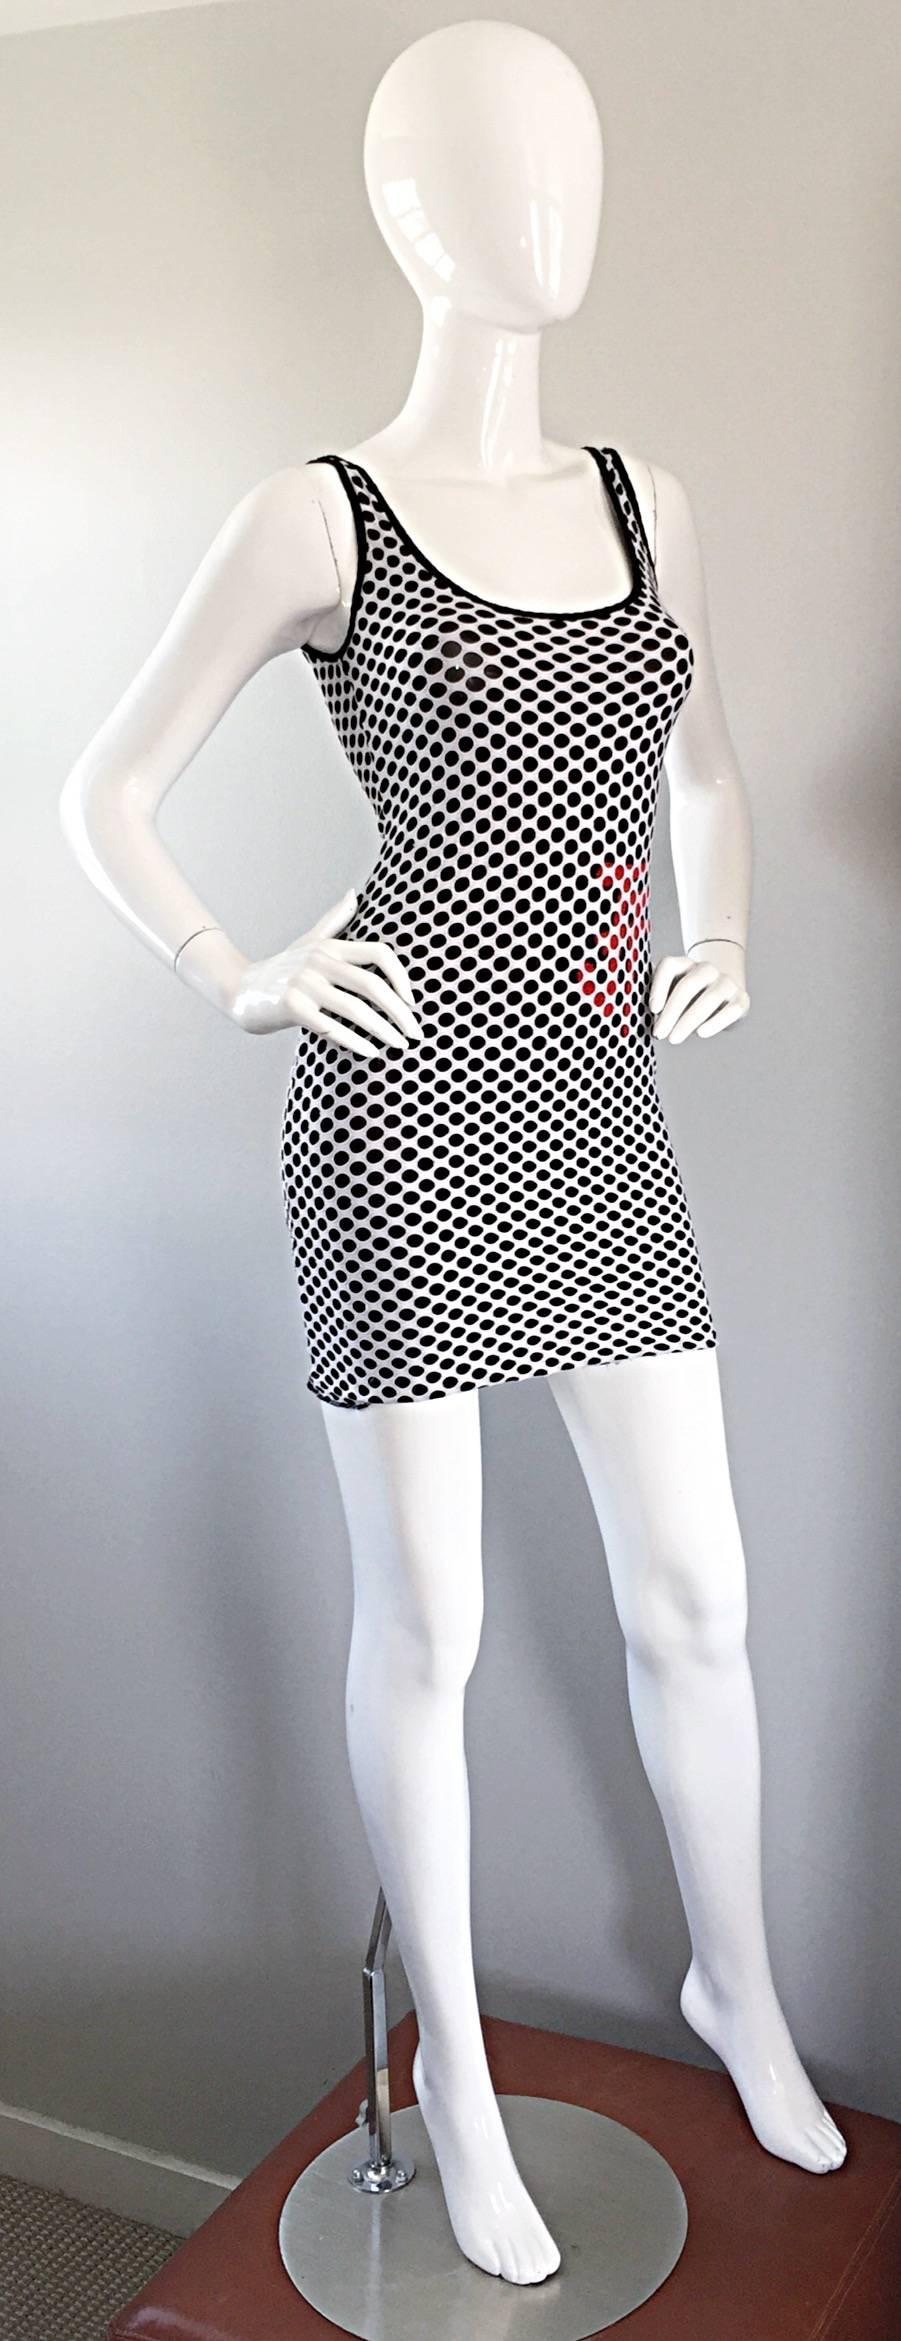 1990s Gianfranco Ferre Black and White Fishnet Beaded Bodycon 90s Vintage Dress In Excellent Condition For Sale In San Diego, CA